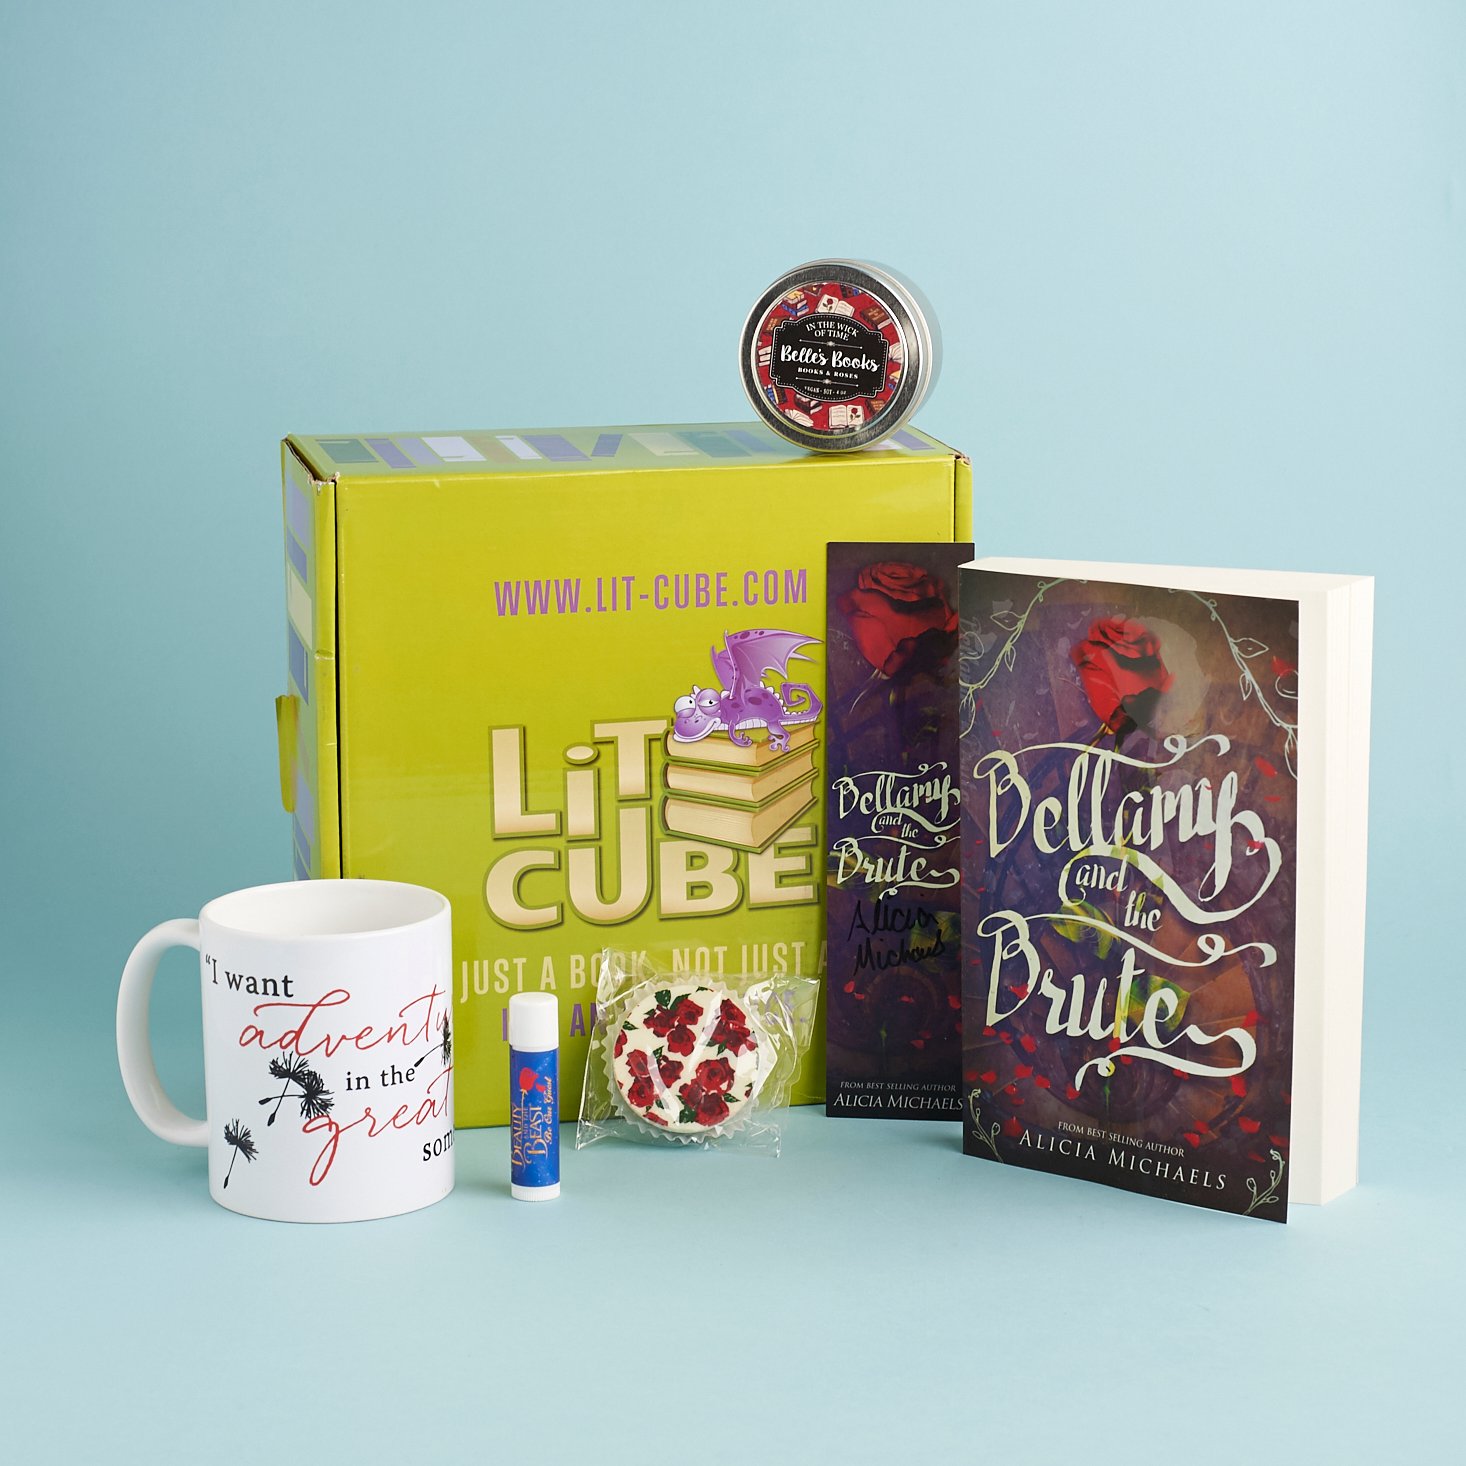 Check out our review of the March 2017 LitCube box!